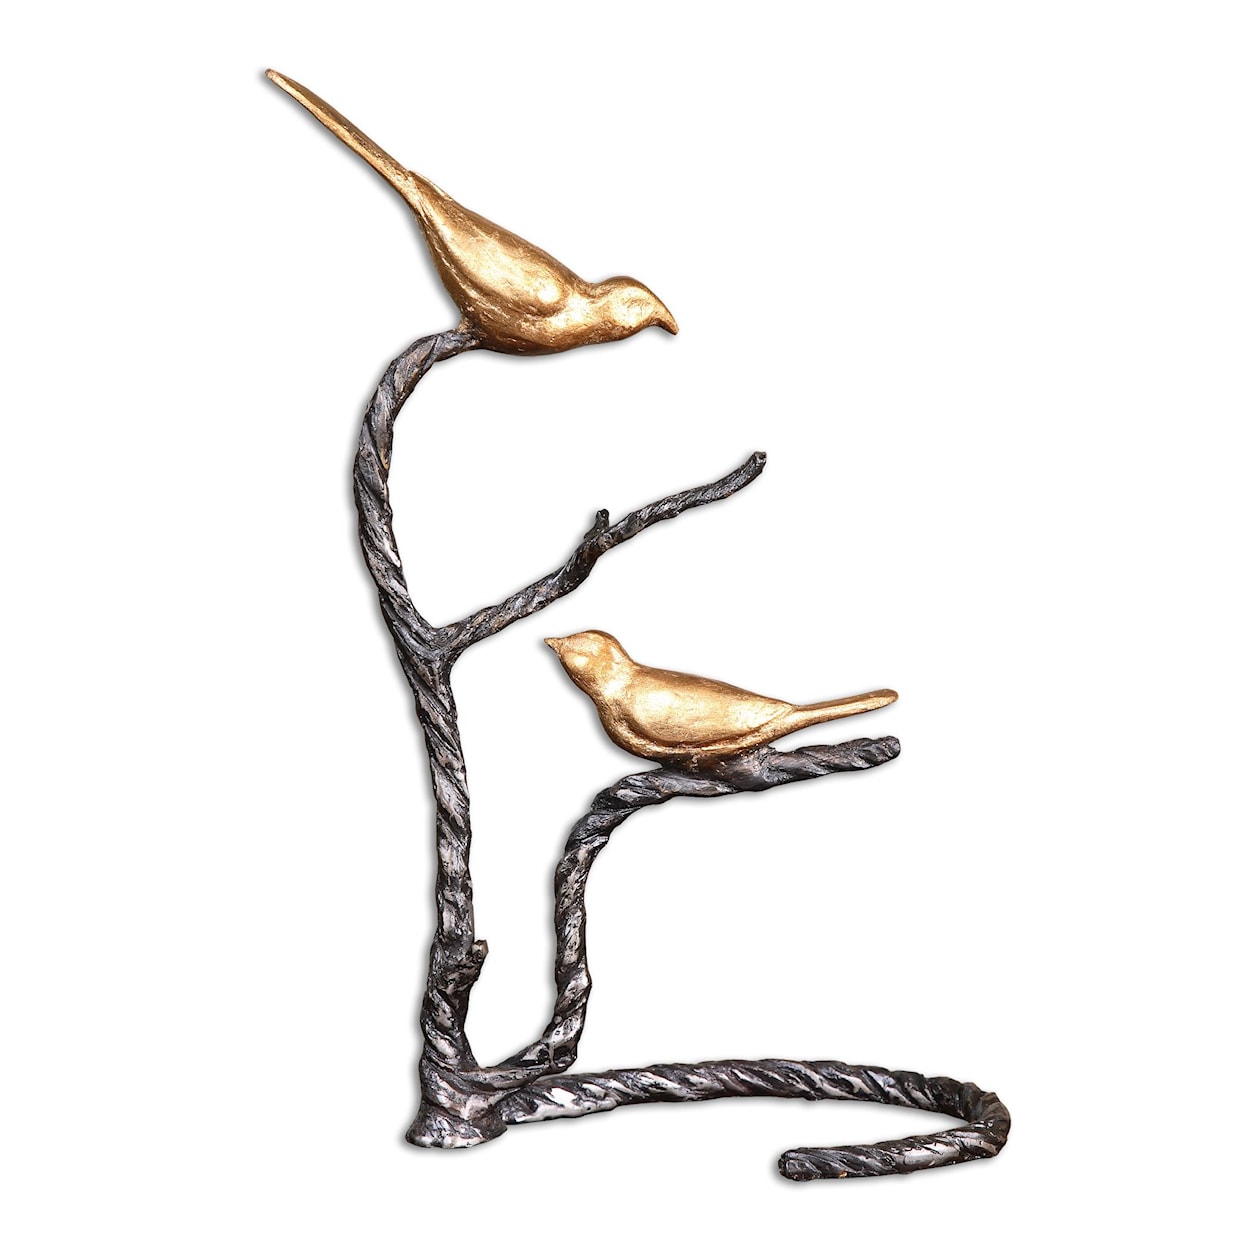 Uttermost Accessories - Statues and Figurines Birds on a Limb Sculpture